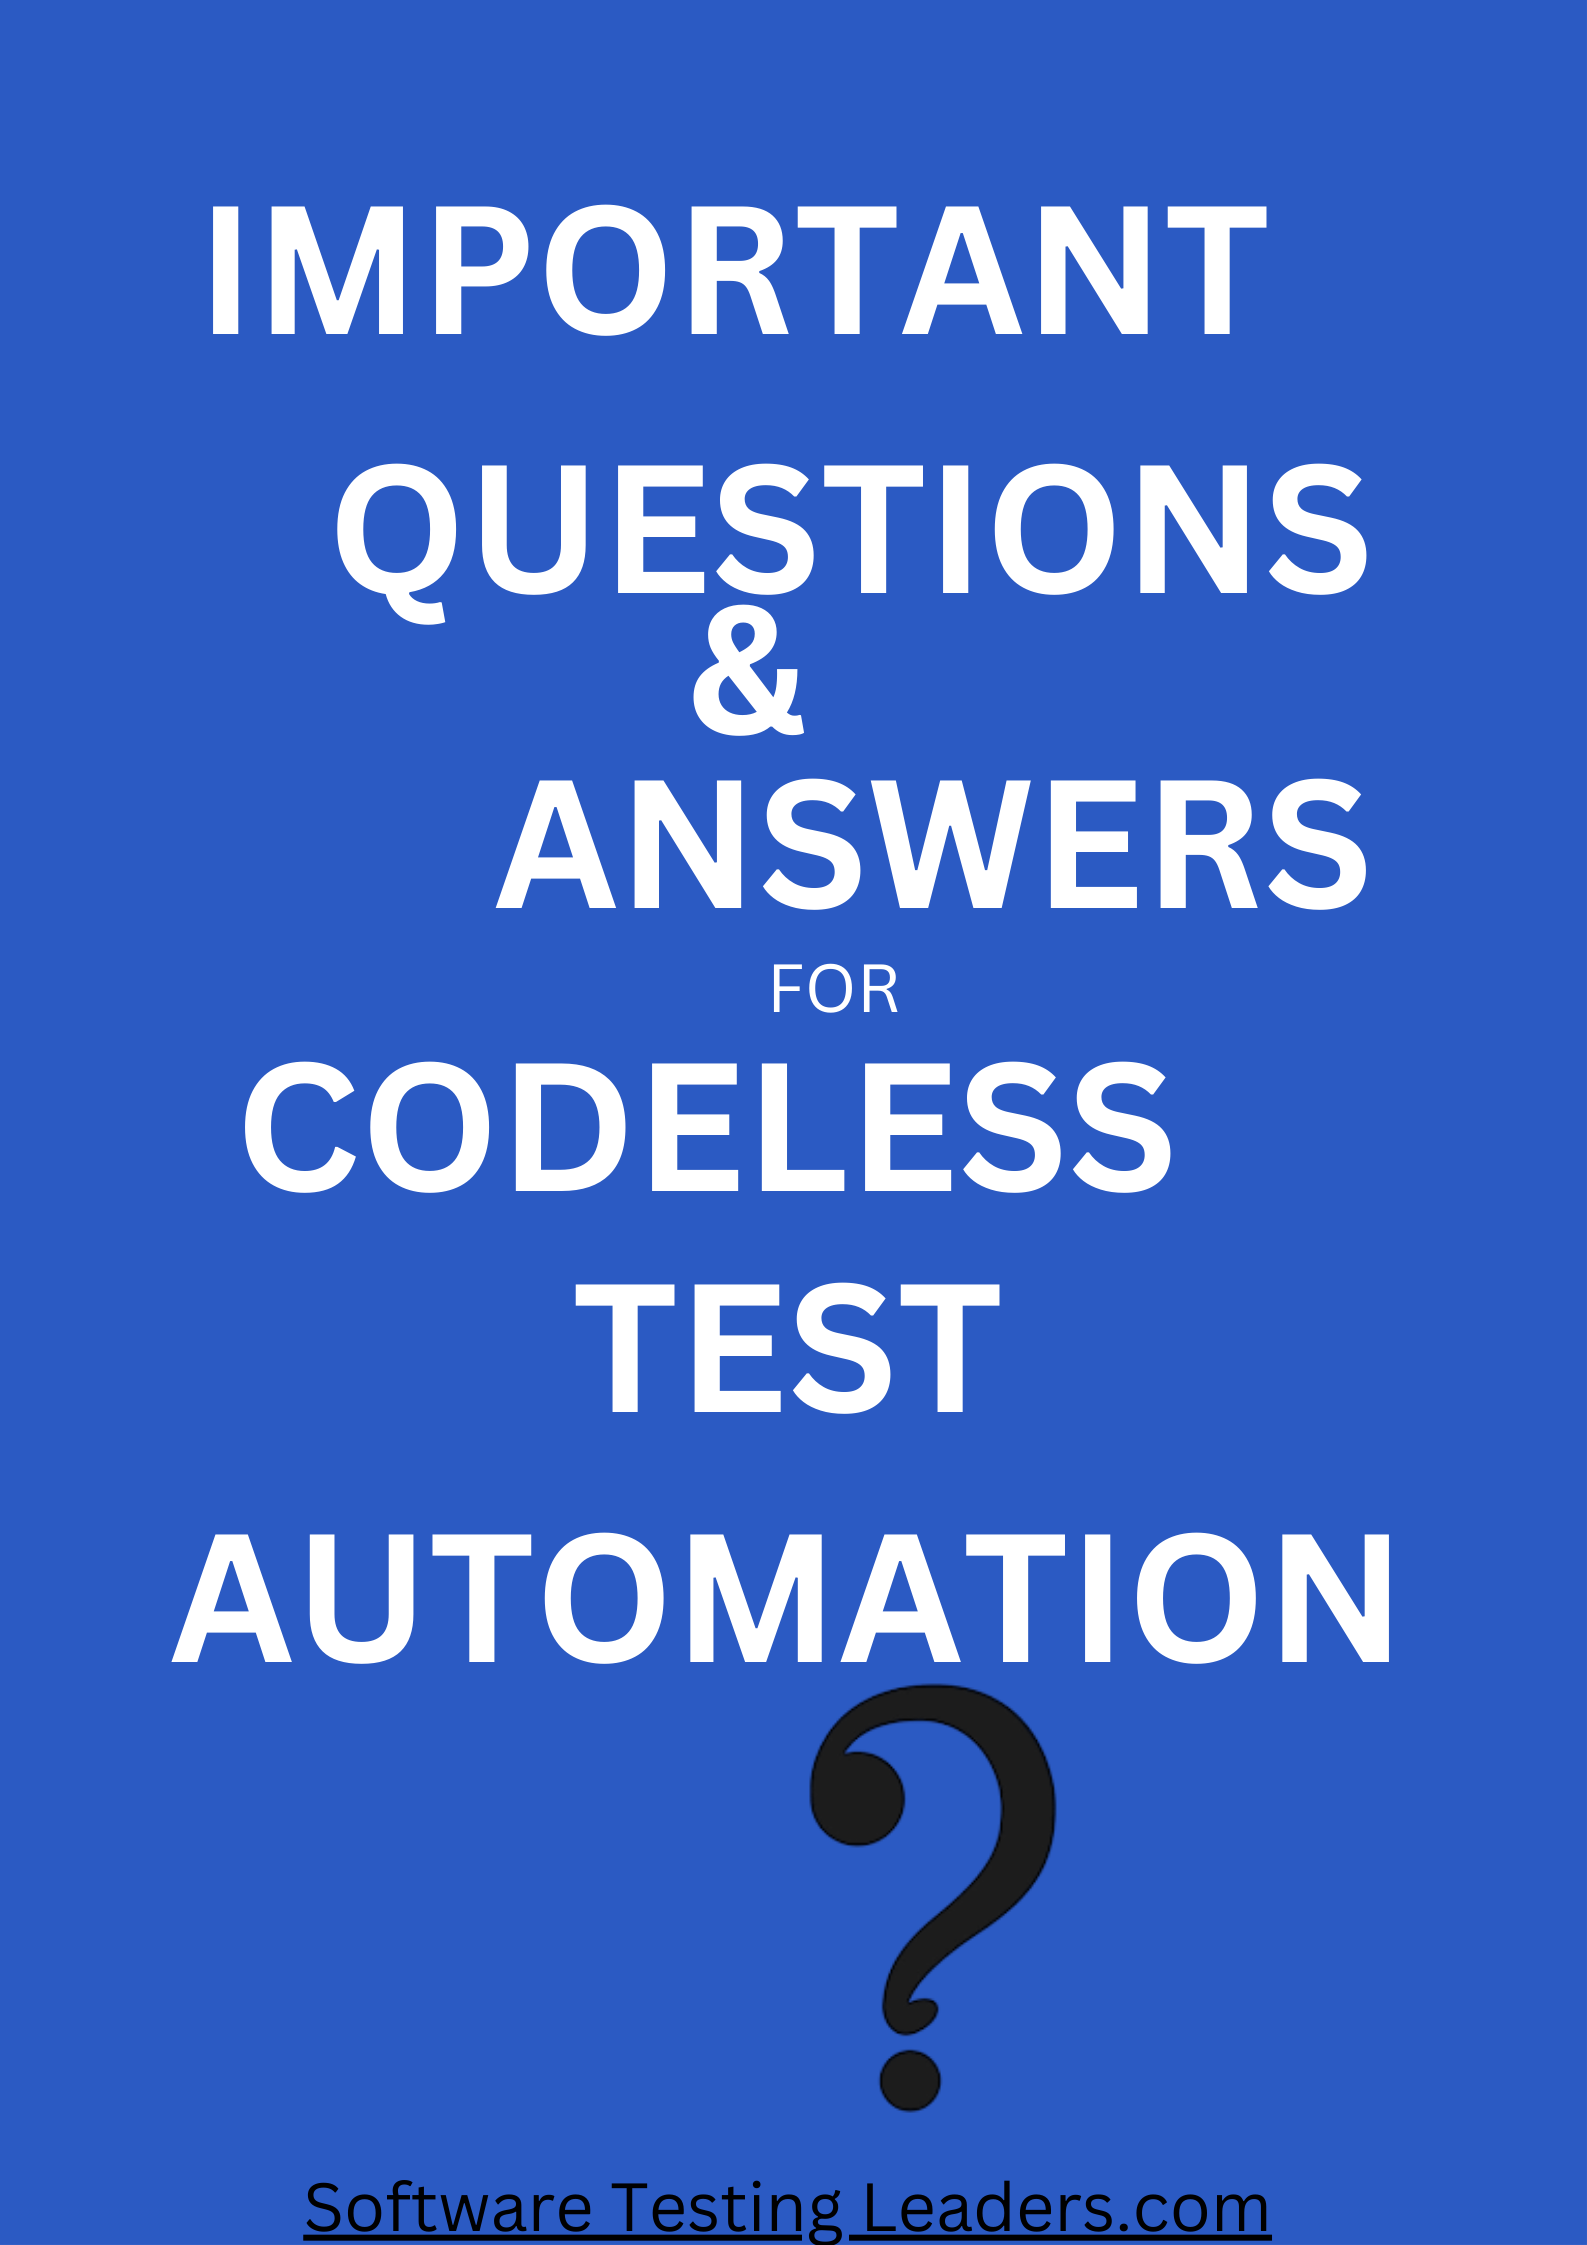 Codeless Test Automation